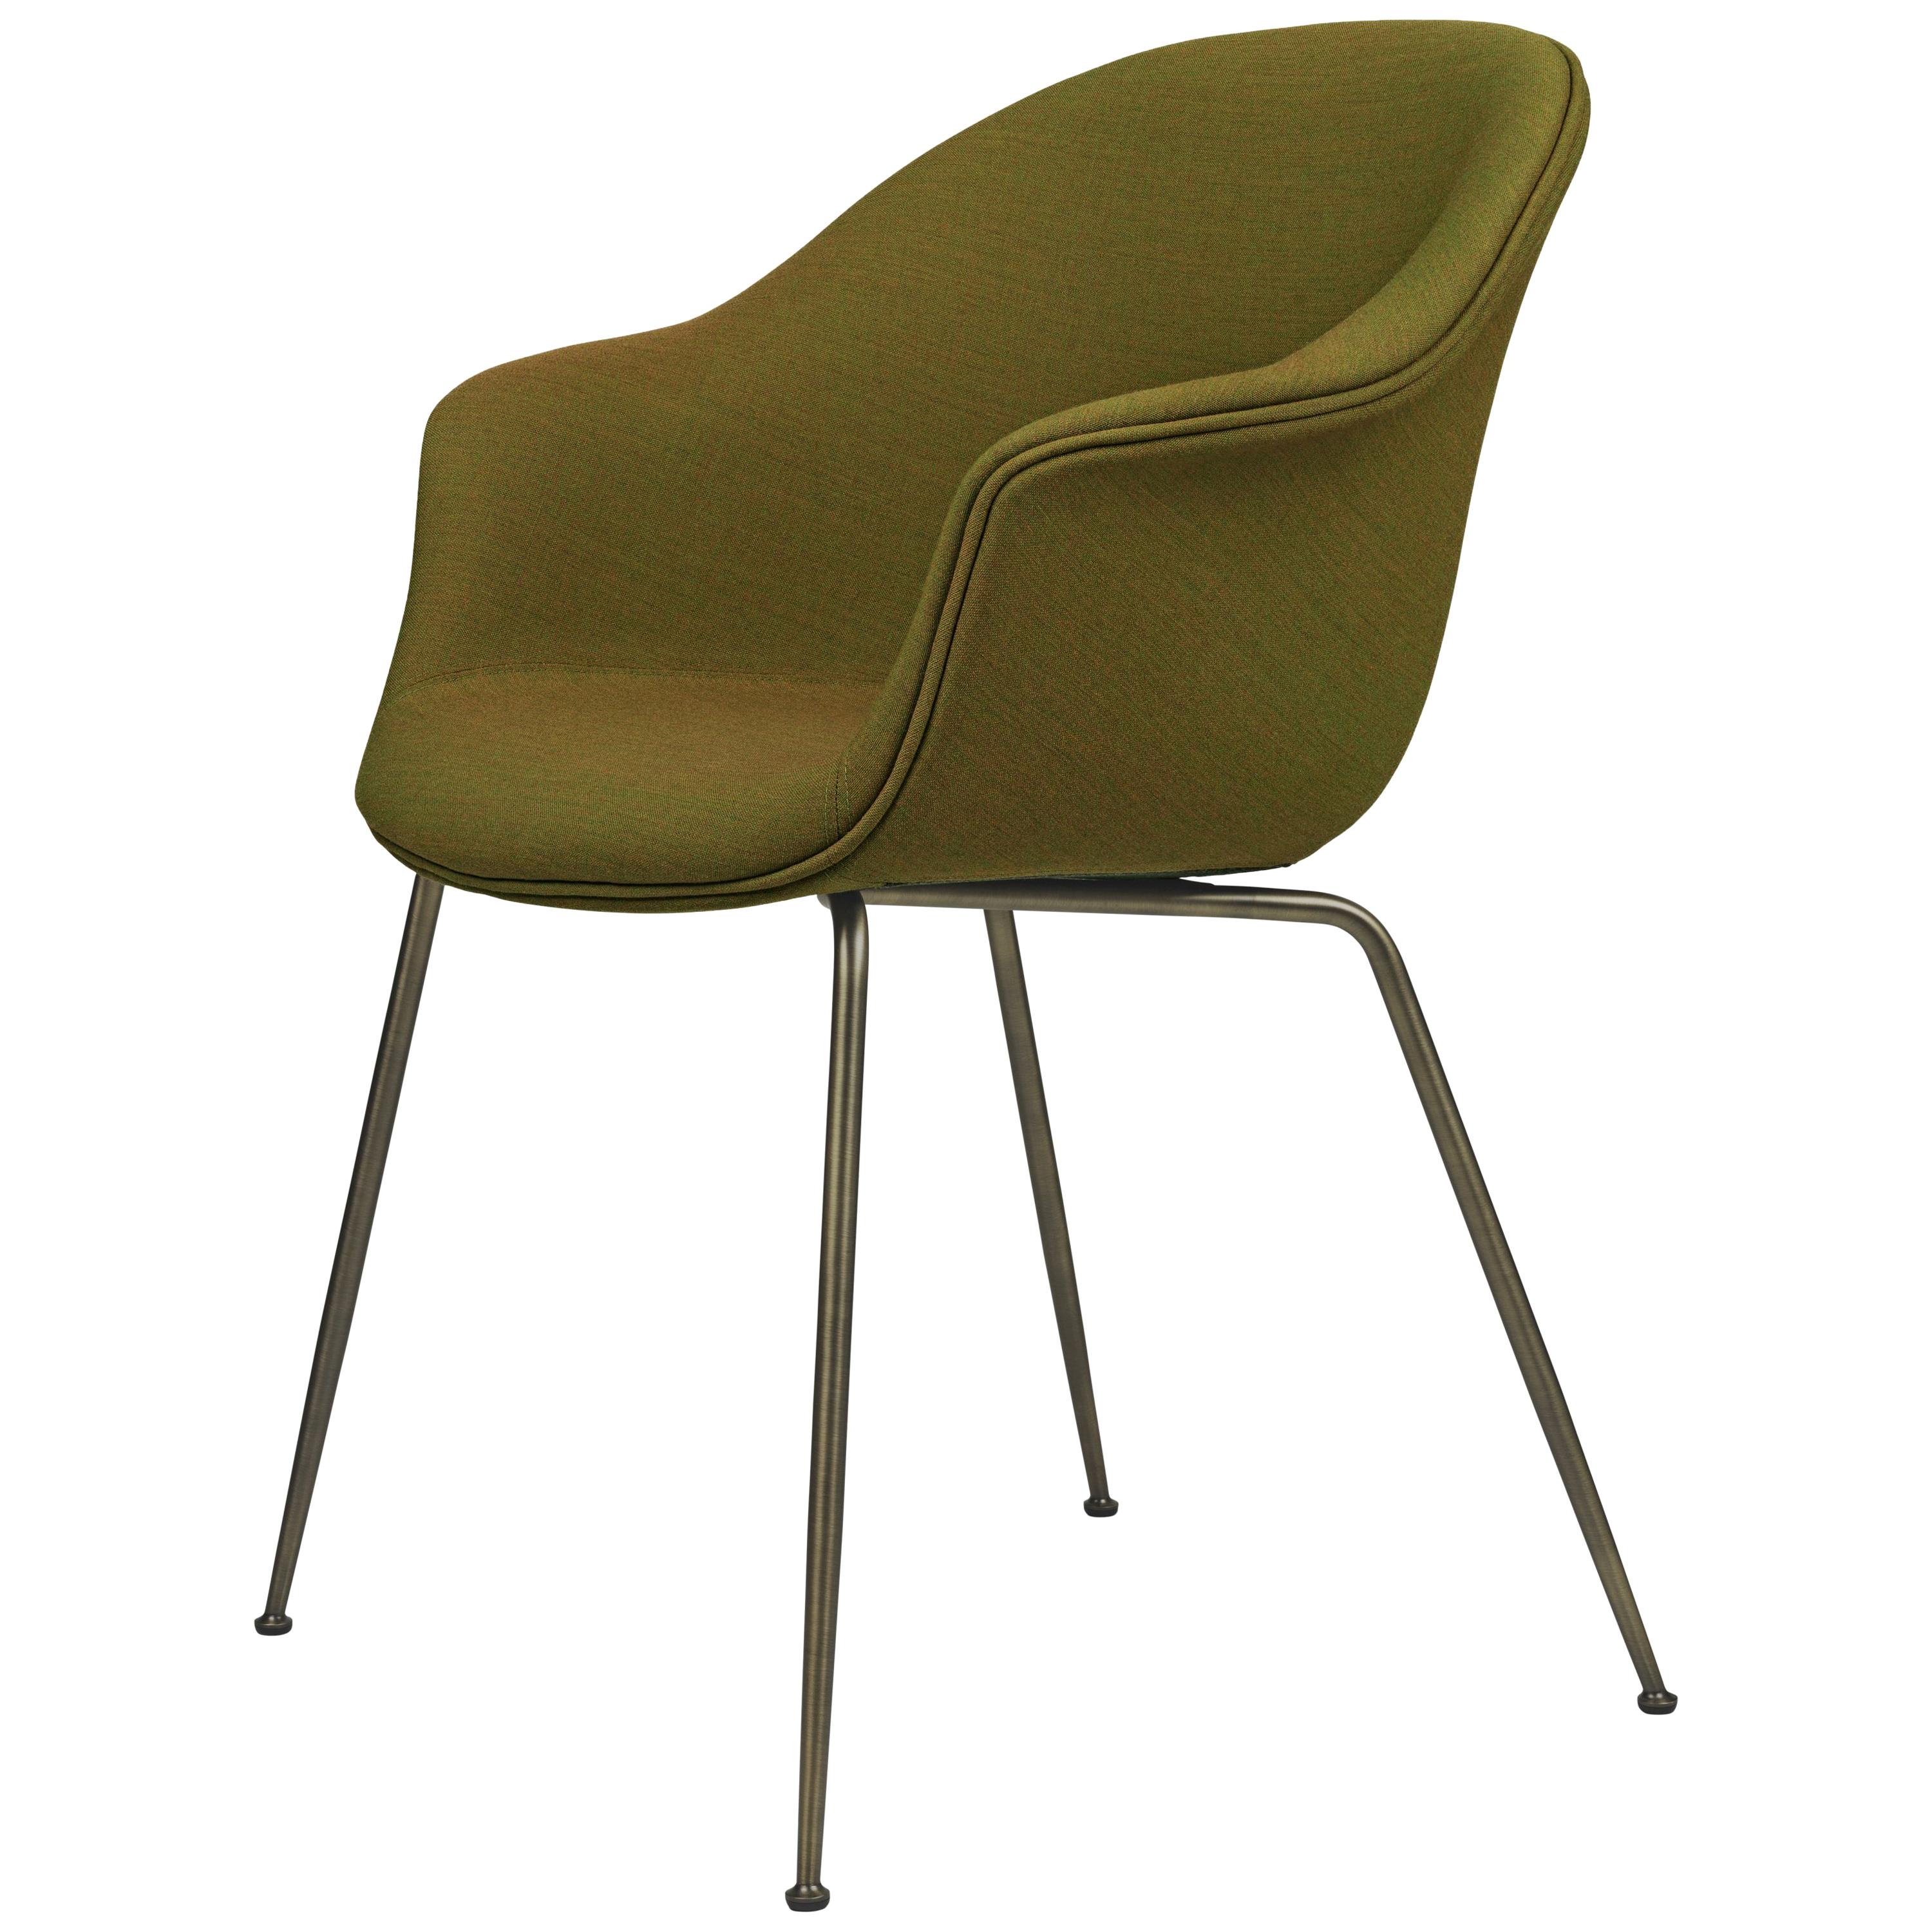 GamFratesi 'Bat' Dining Chair in Green with Antique Brass Conic Base